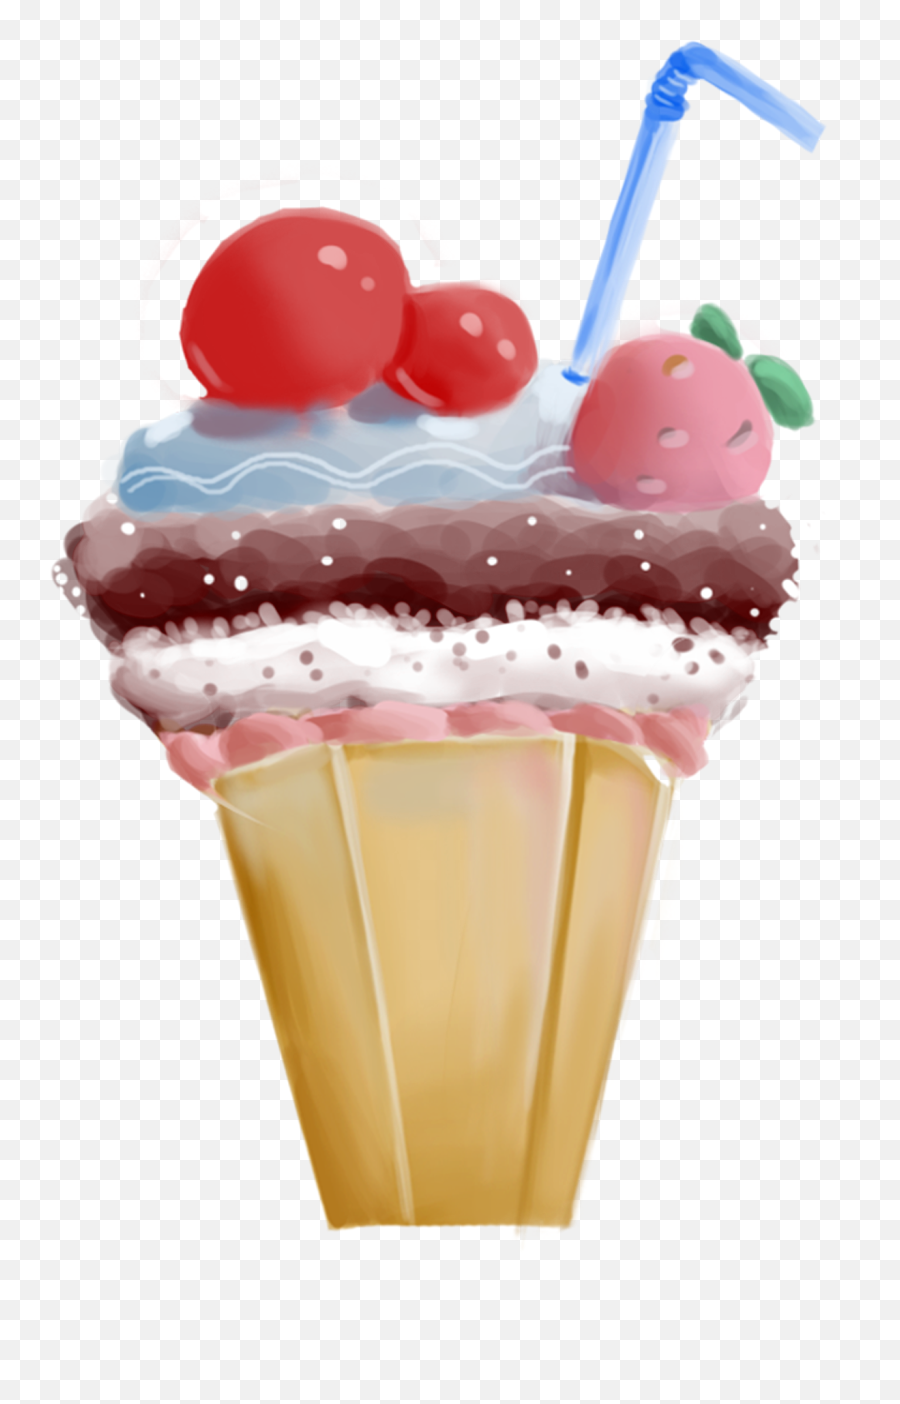 Hd Ice Cream Png Image Free Download - Portable Network Graphics,Ice Cream Clipart Png